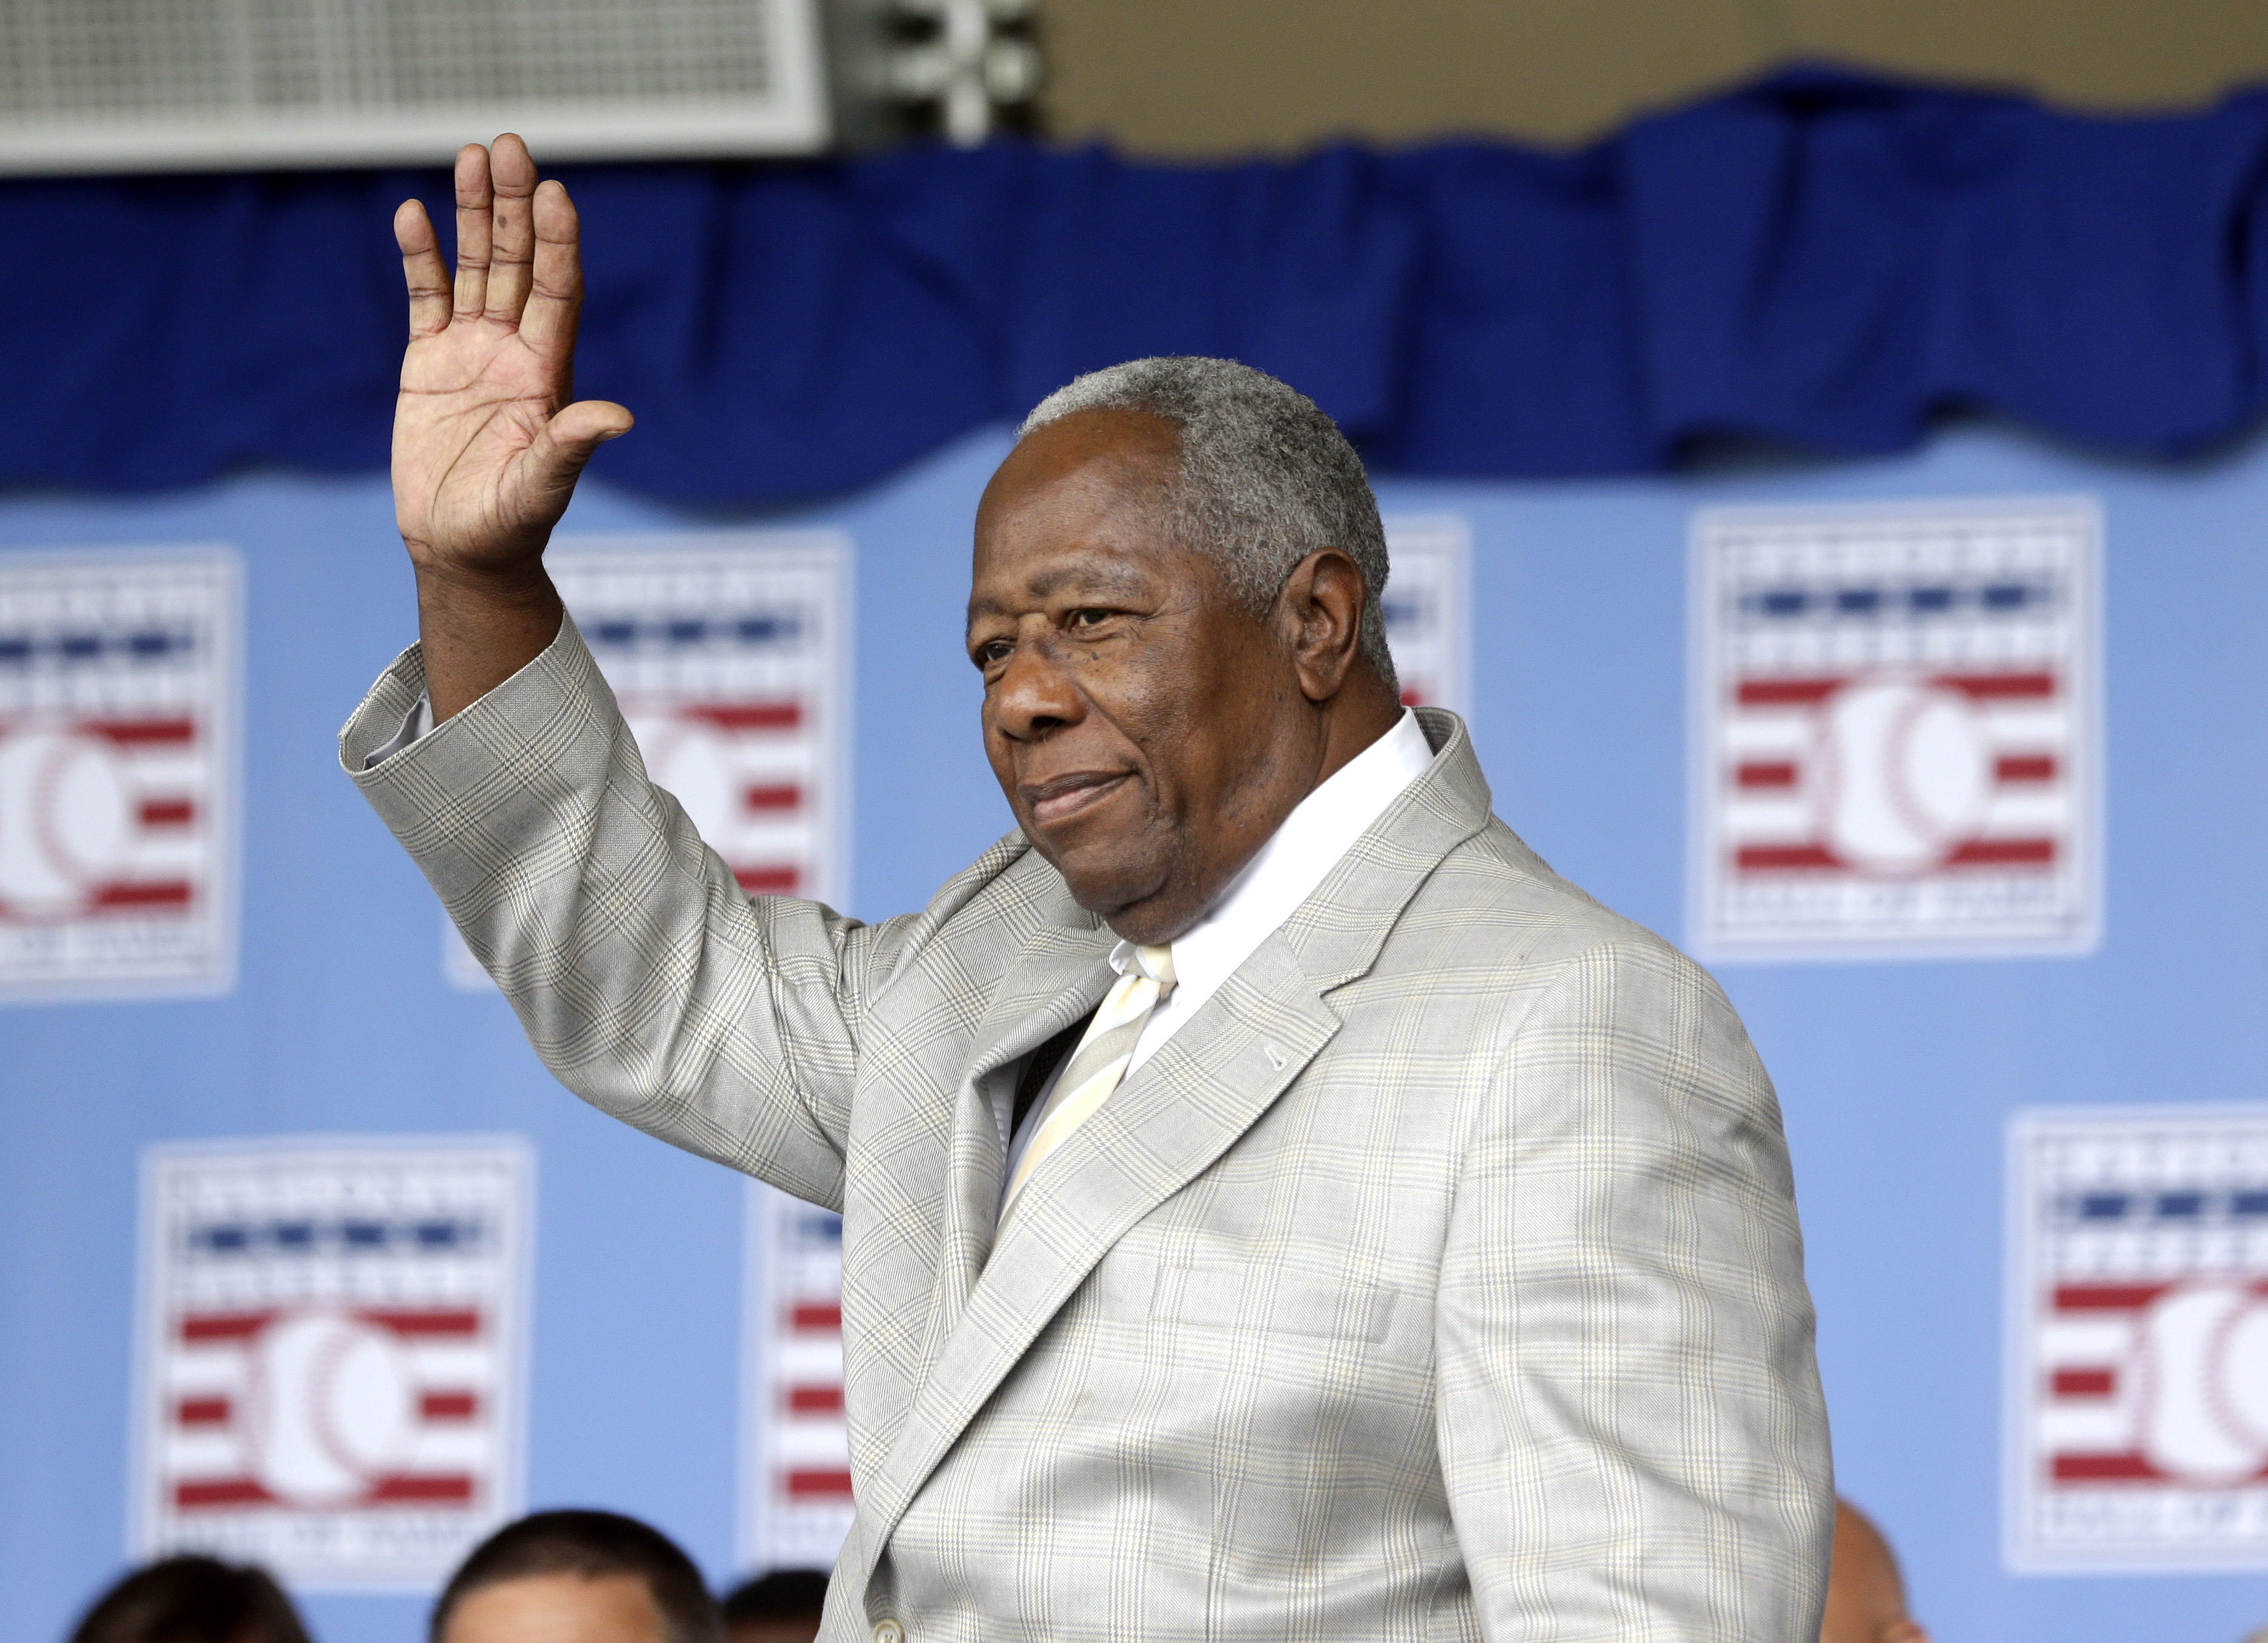 FILE - Hall of Famer Hank Aaron waves to the crowd during Baseball Hall of Fame induction ceremonies in Cooperstown, N.Y., in this Sunday, July 28, 2013, file photo. Hank Aaron, who endured racist threats with stoic dignity during his pursuit of Babe Ruth but went on to break the career home run record in the pre-steroids era, died early Friday, Jan. 22, 2021. He was 86. The Atlanta Braves said Aaron died peacefully in his sleep. No cause of death was given. Photo: AP